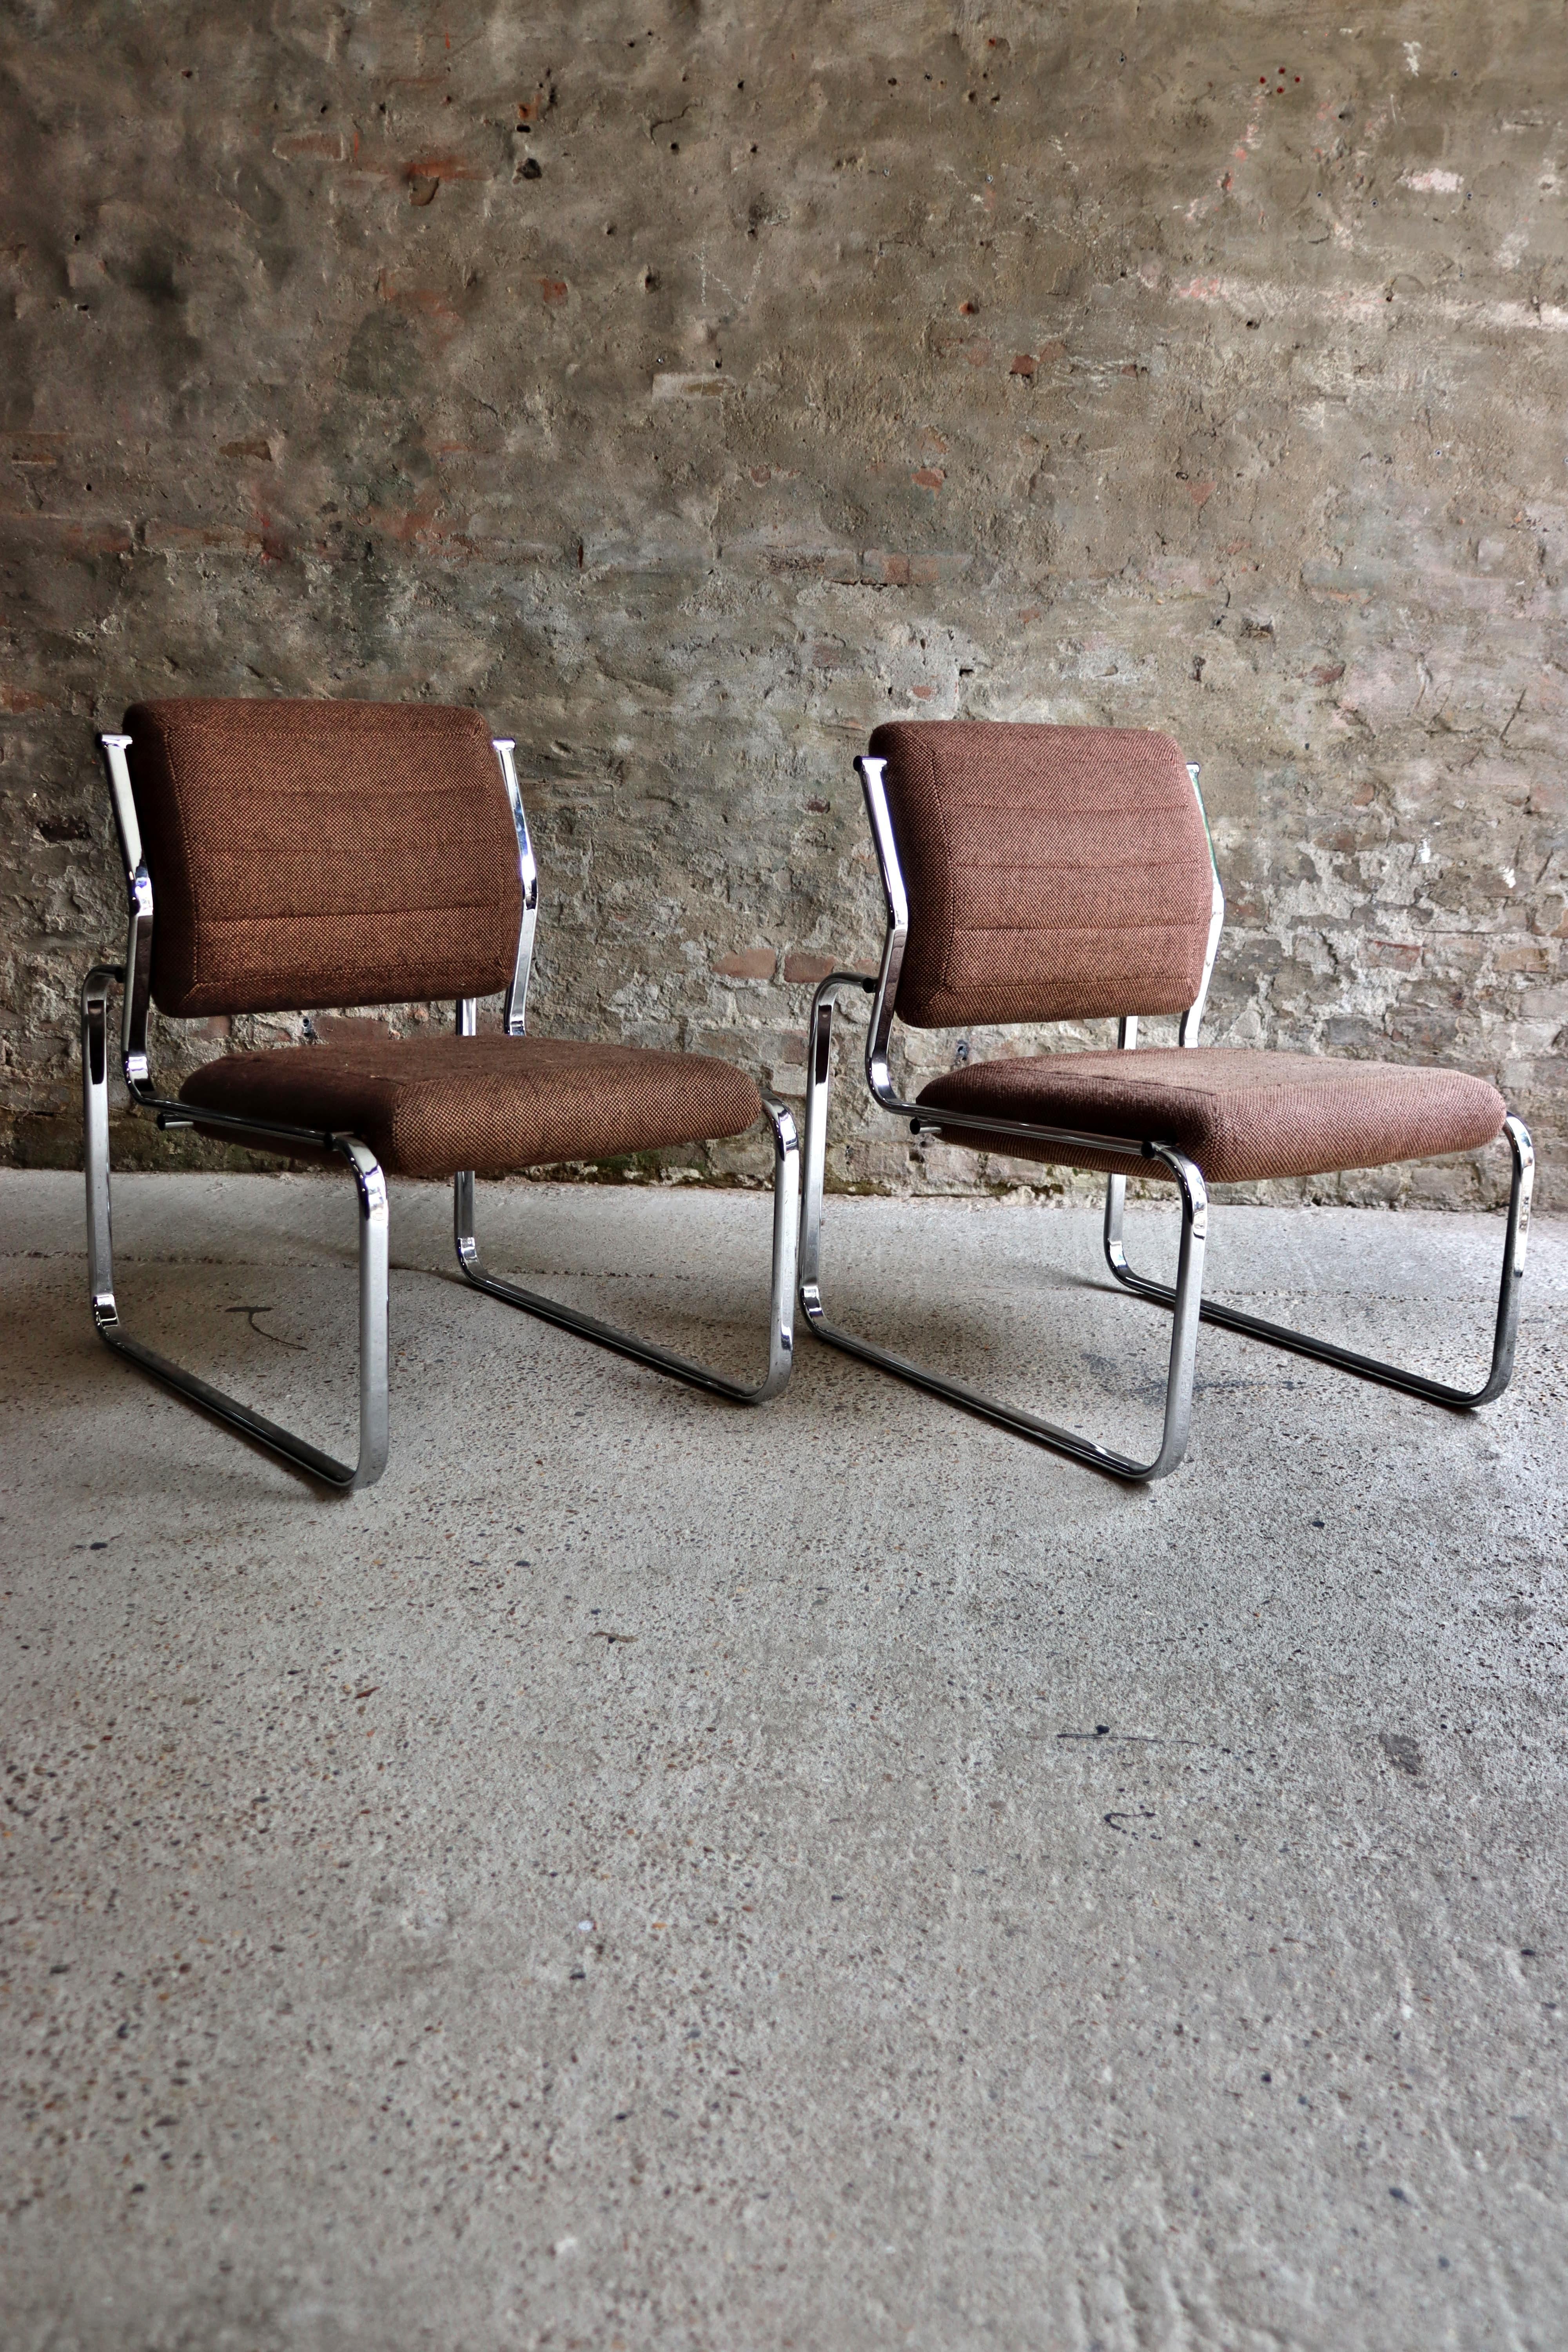 These chairs have been sitting in a waiting room at Air France in the 1970s. They have a bauhaus vibe and have a very special chrome base with proper cushions and high end fabric upholstery (slight discolouration). Some say these chairs came from